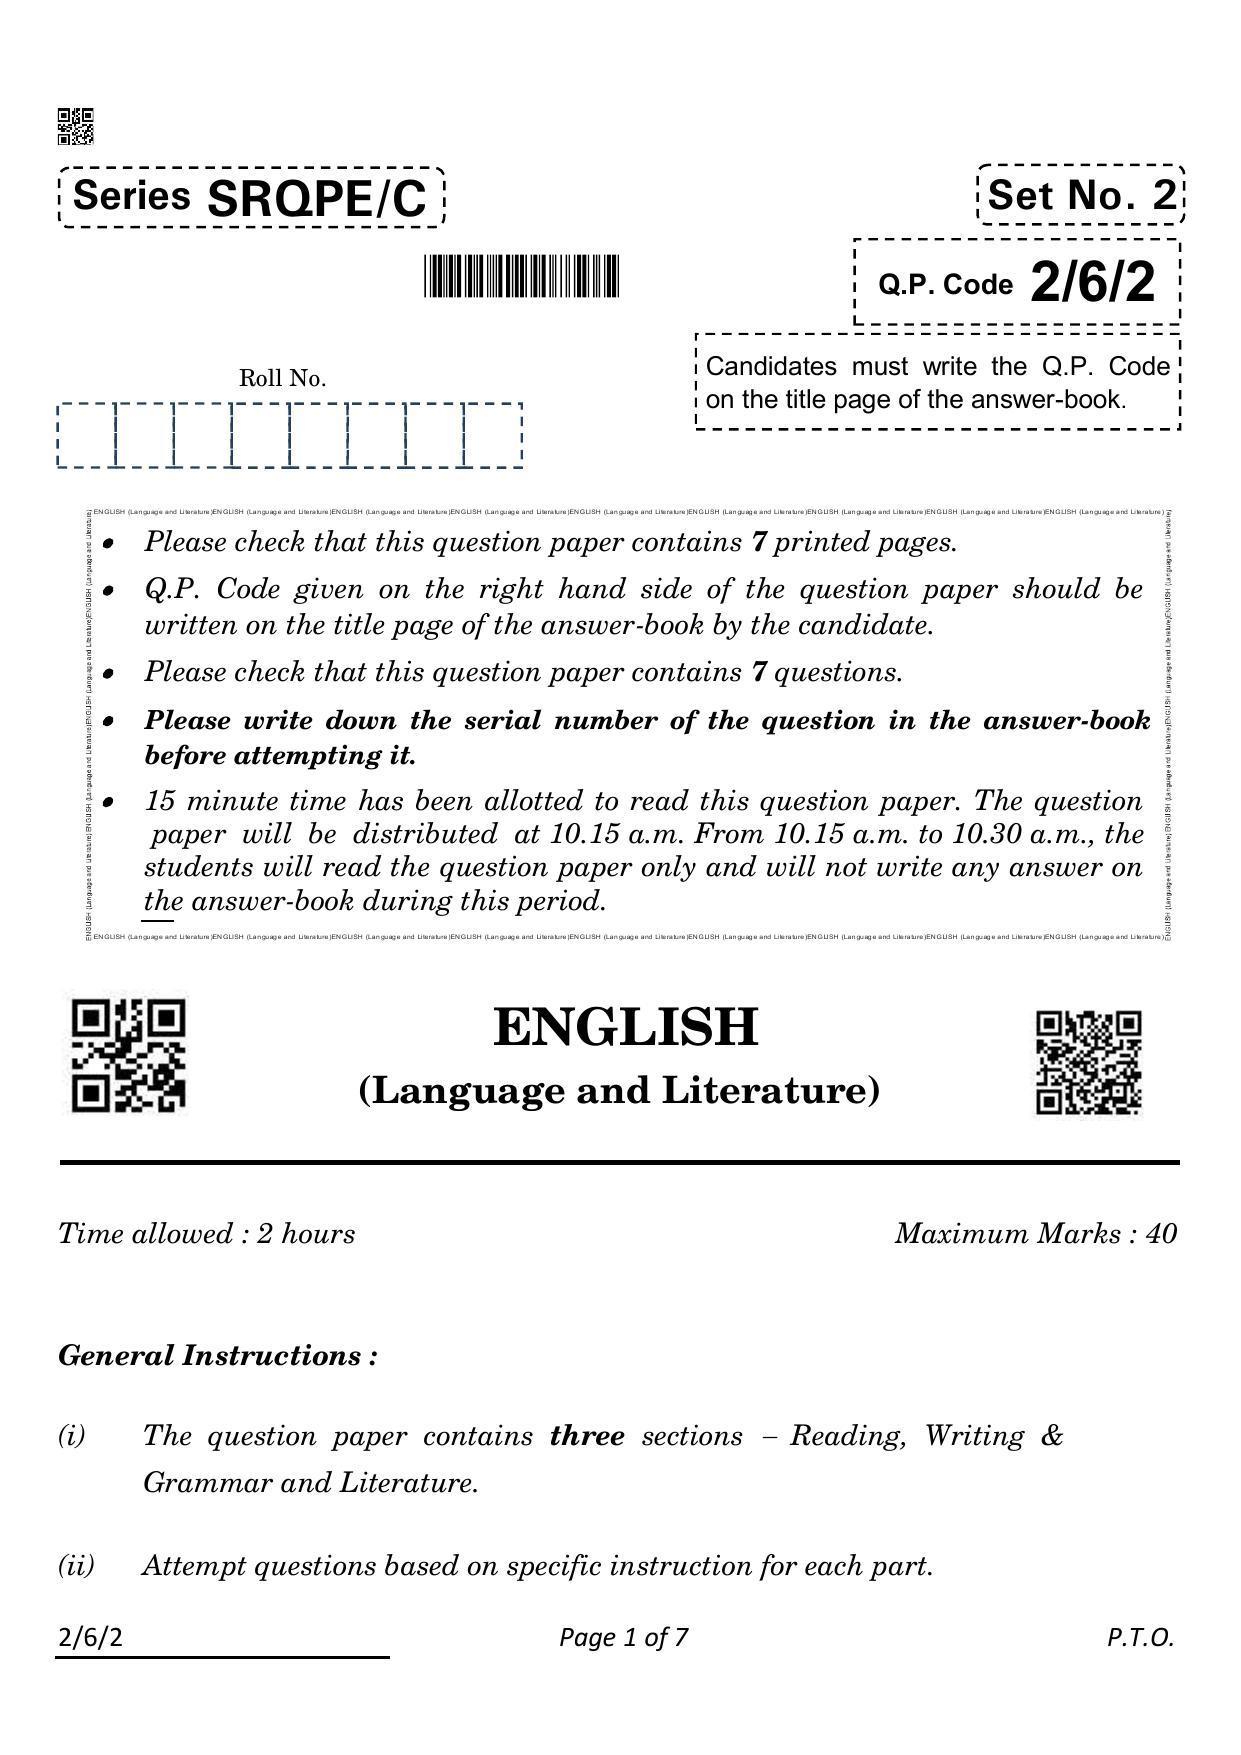 CBSE Class 10 2-6-2_English Language And Literature 2022 Compartment Question Paper - Page 1